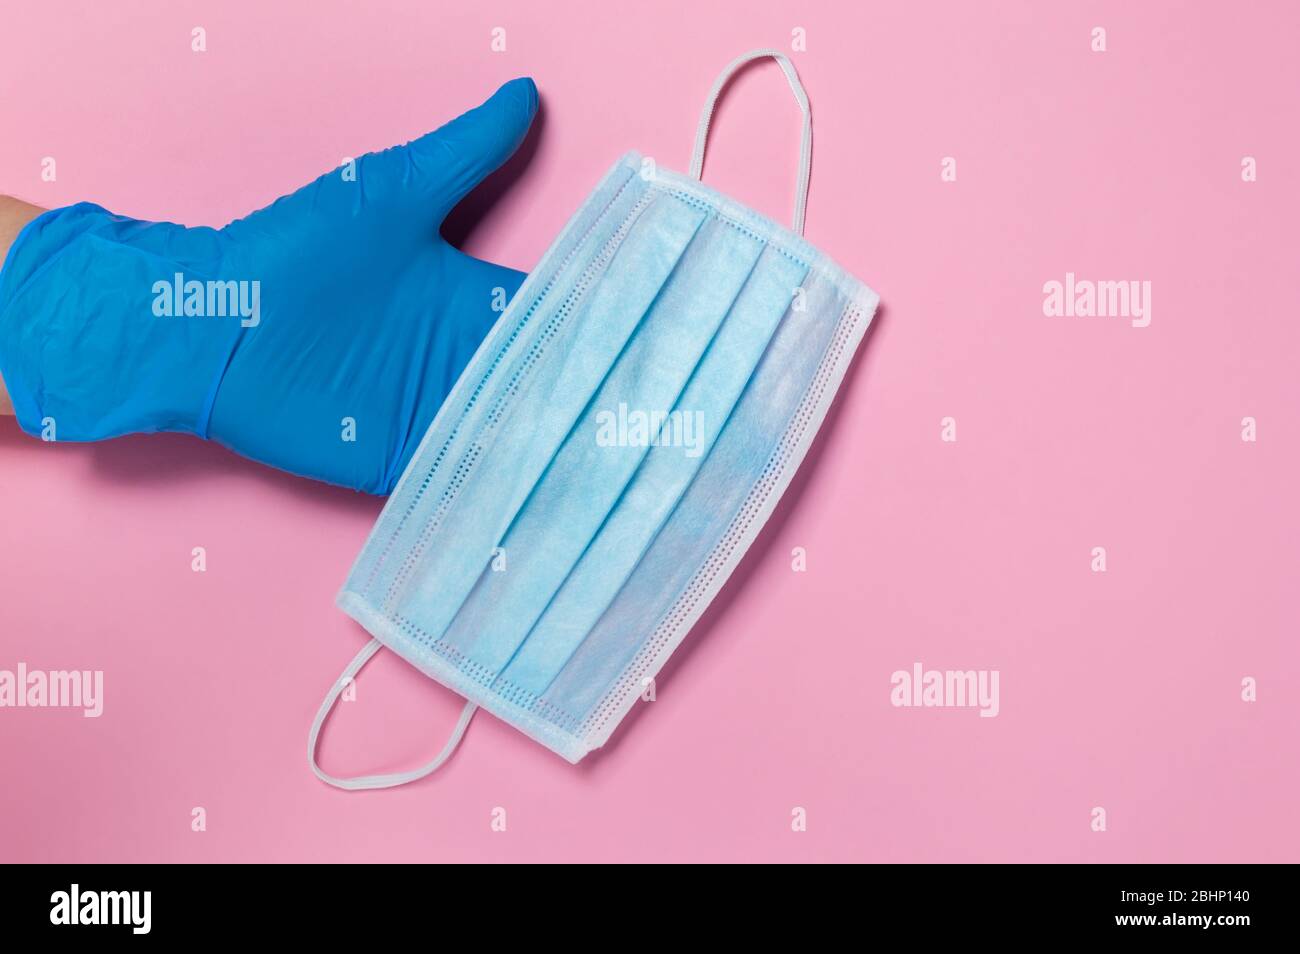 Coronavirus protection. Hand in blue disposable latex glove holding medical surgical mask on pink background. Hygiene measures to prevent spread of Co Stock Photo